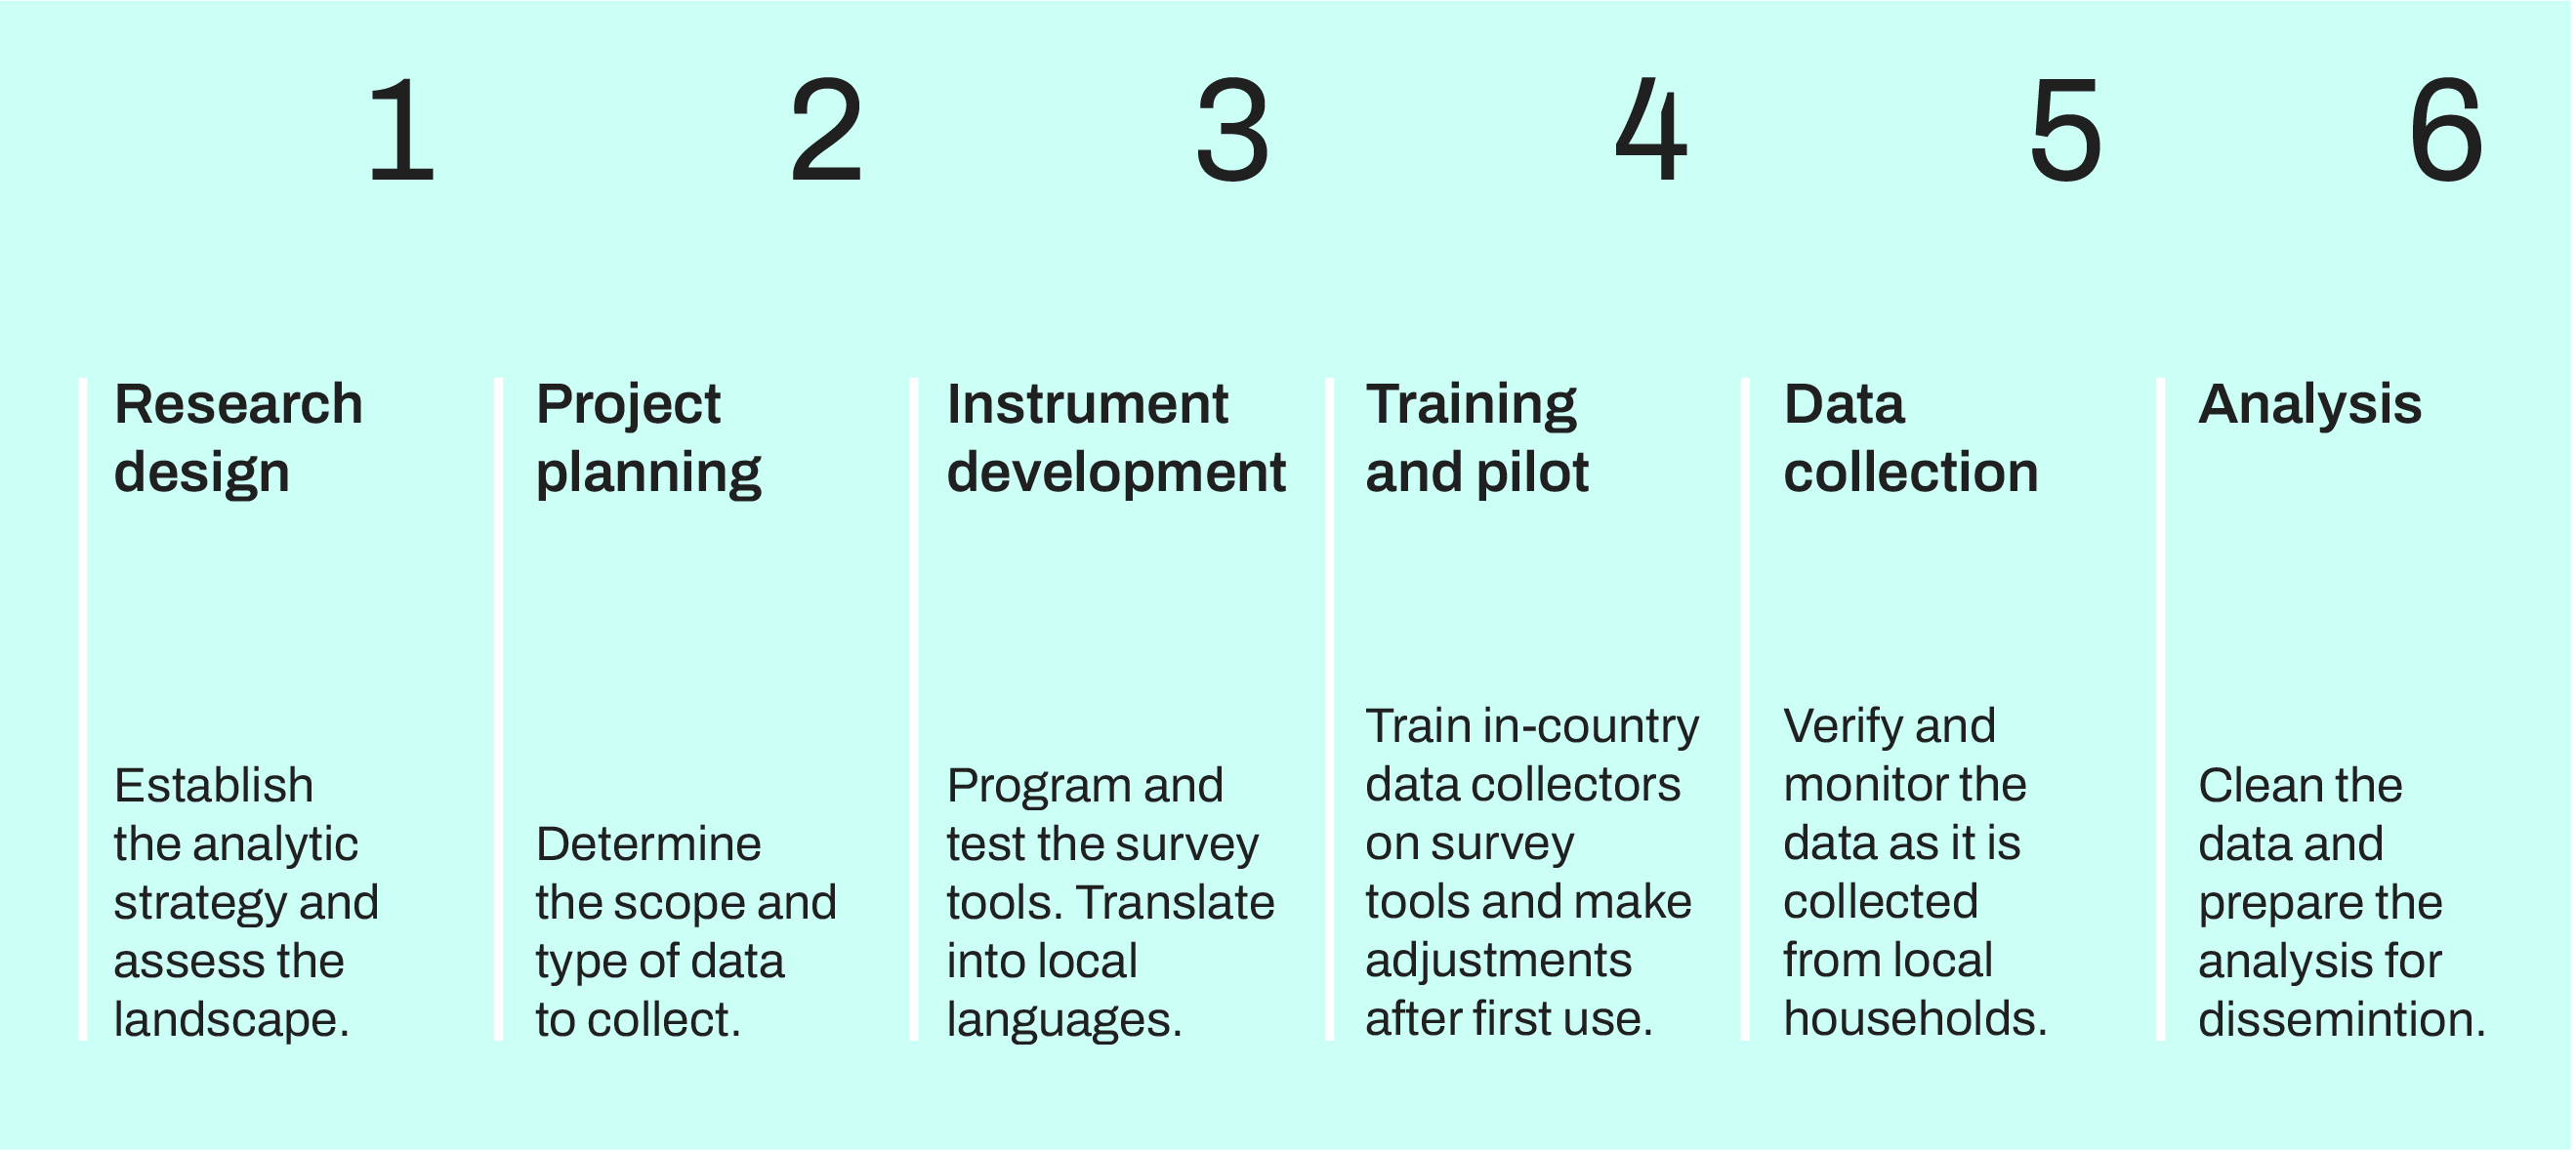 Diagram showing the process for primary data collection: Step 1: research design (establish the analytic strategy and assess the landscape), Step 2: Project planning (Determine the scope and type of data to collect), Step 3: Instrument development (Program and test the survey tools. Translate into local languages), Step 4: training and pilot (Train in-country data collectors on survey tools and make adjustments after first use), Step 5: Data collection (Verify and monitor the data as it is collected from local households), Step 6: Analysis (clean the data and prepare the analysis for dissemination).